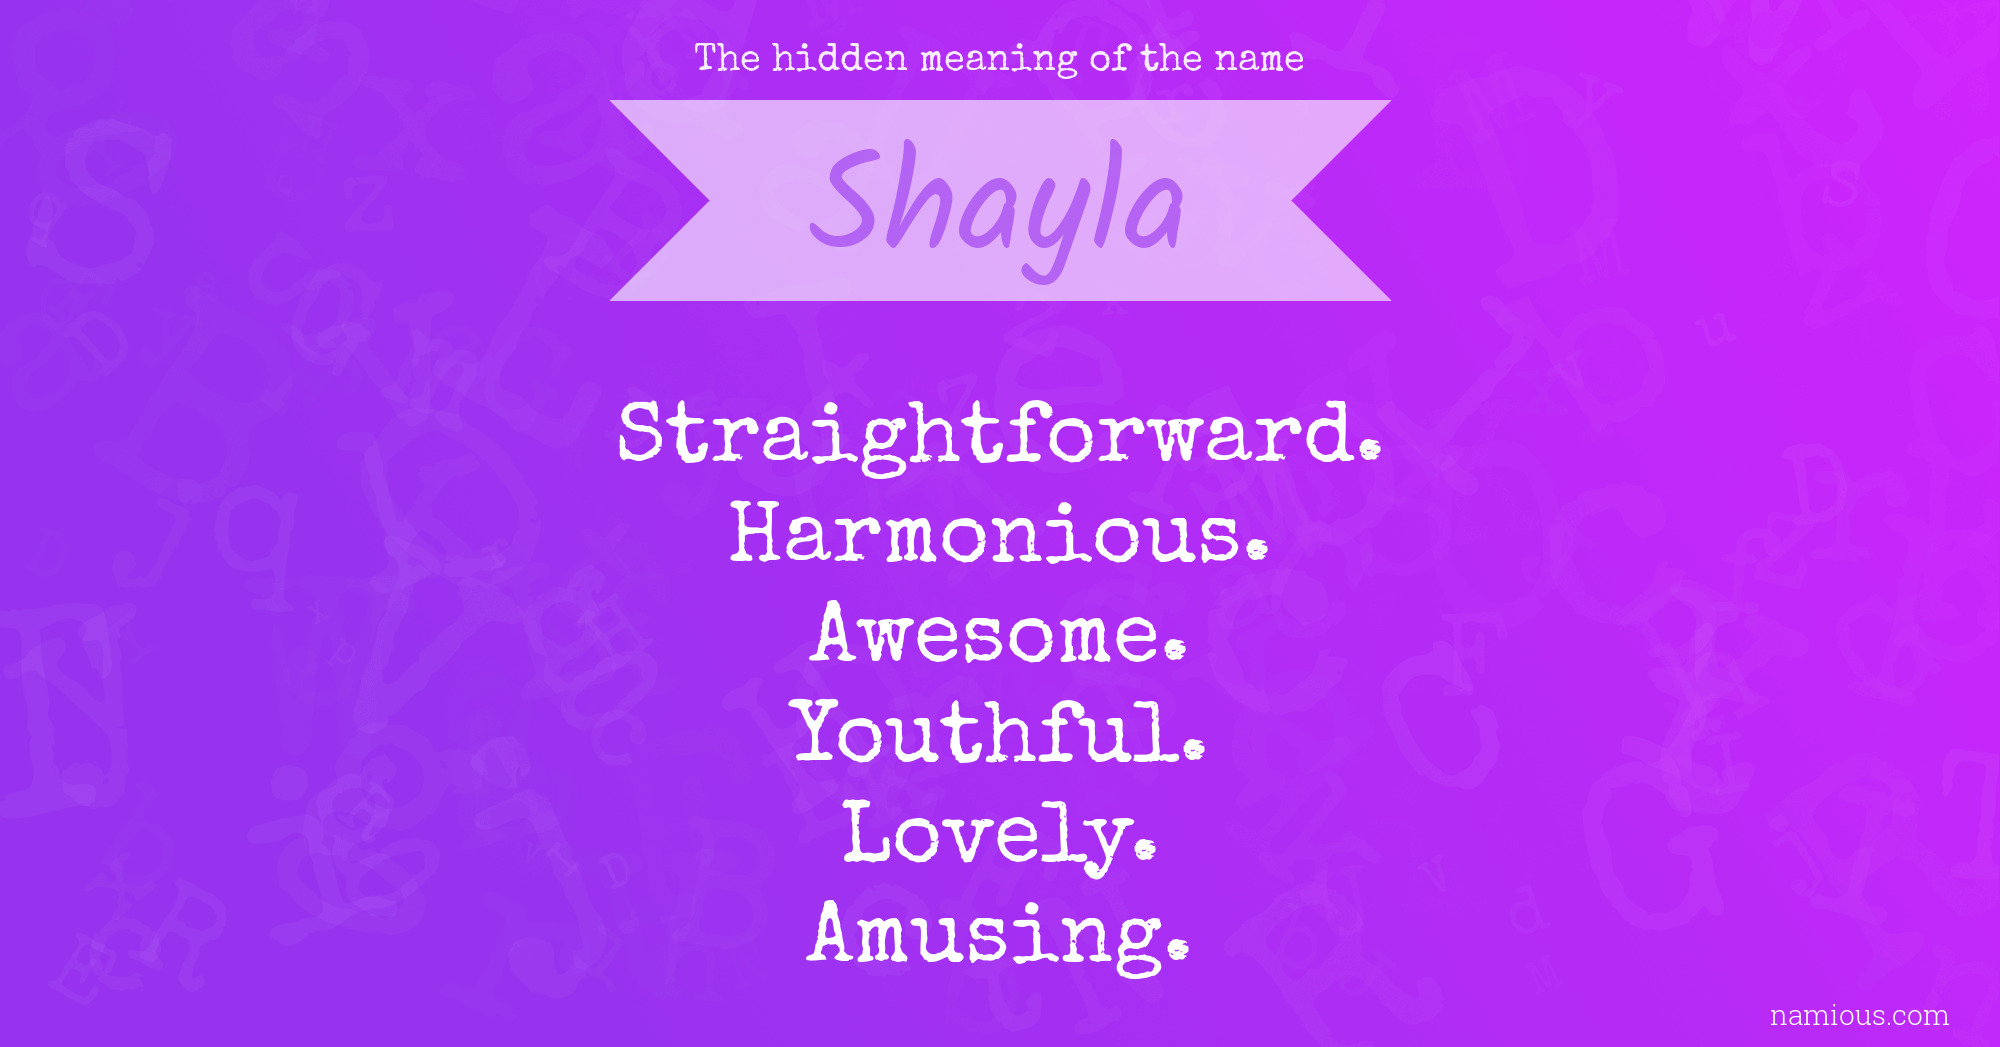 The hidden meaning of the name Shayla